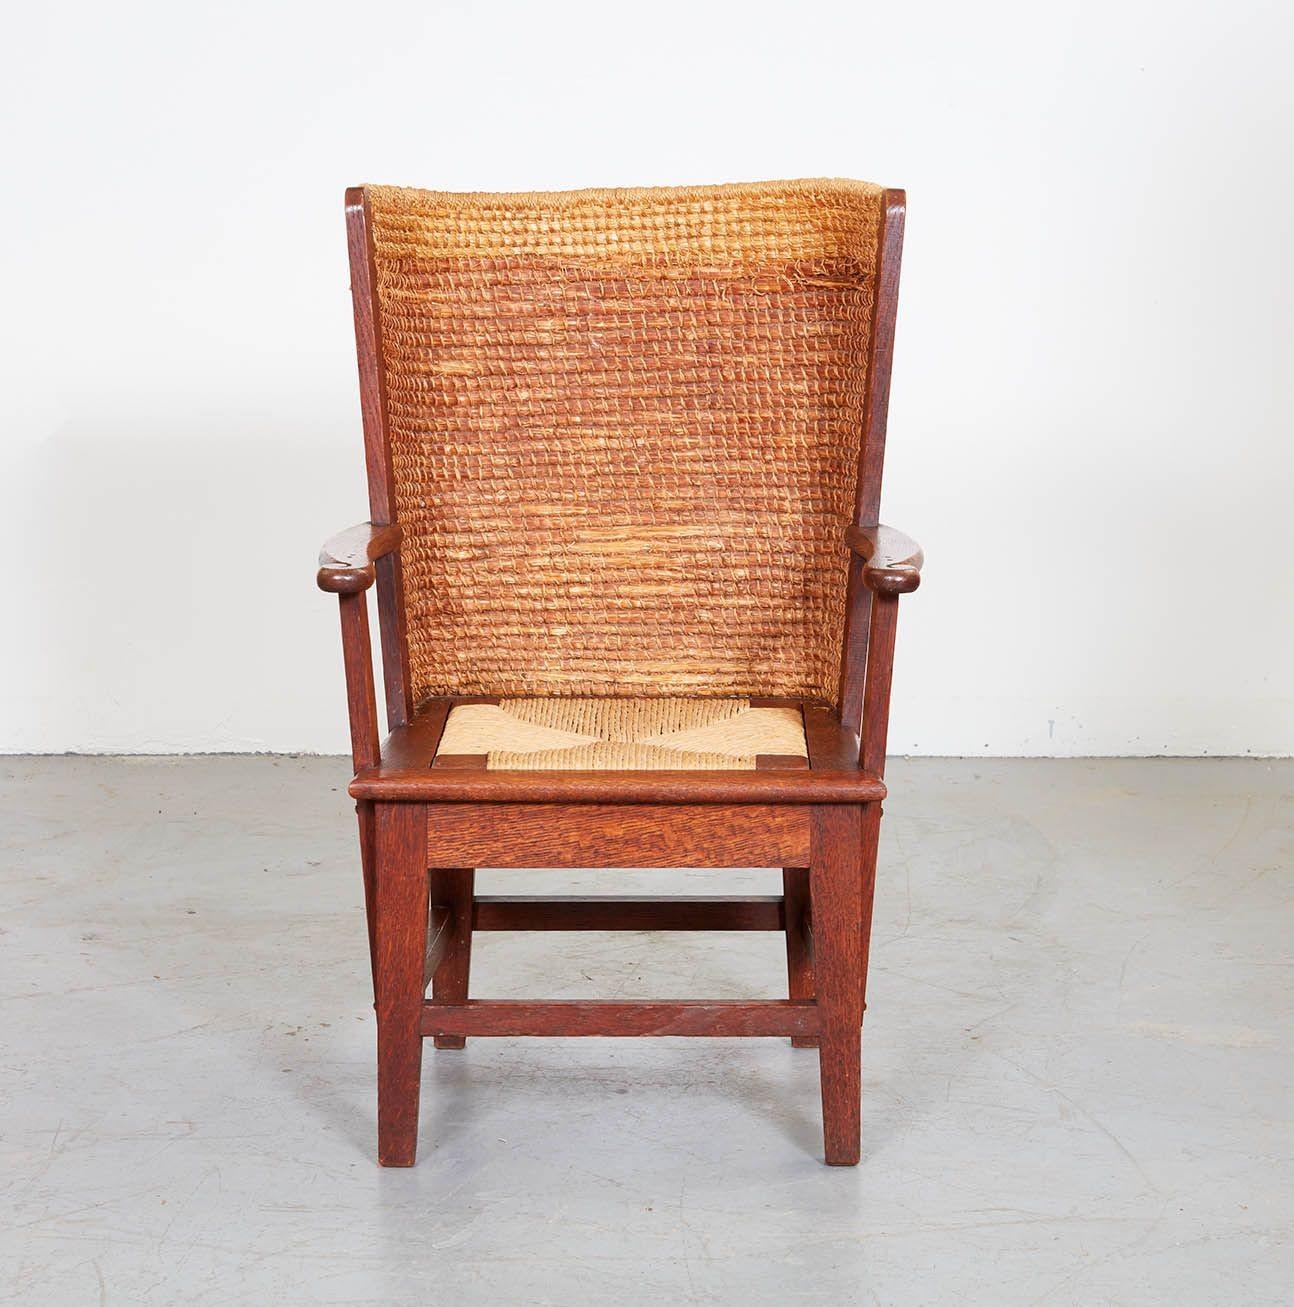 Early 20th century diminutive Orkney Islands chair. These chairs have been made for 200 years on the Orkney Islands off of Scotland using the natural rush and wood found on the island. They were made for sitting next to the fire and keeping the